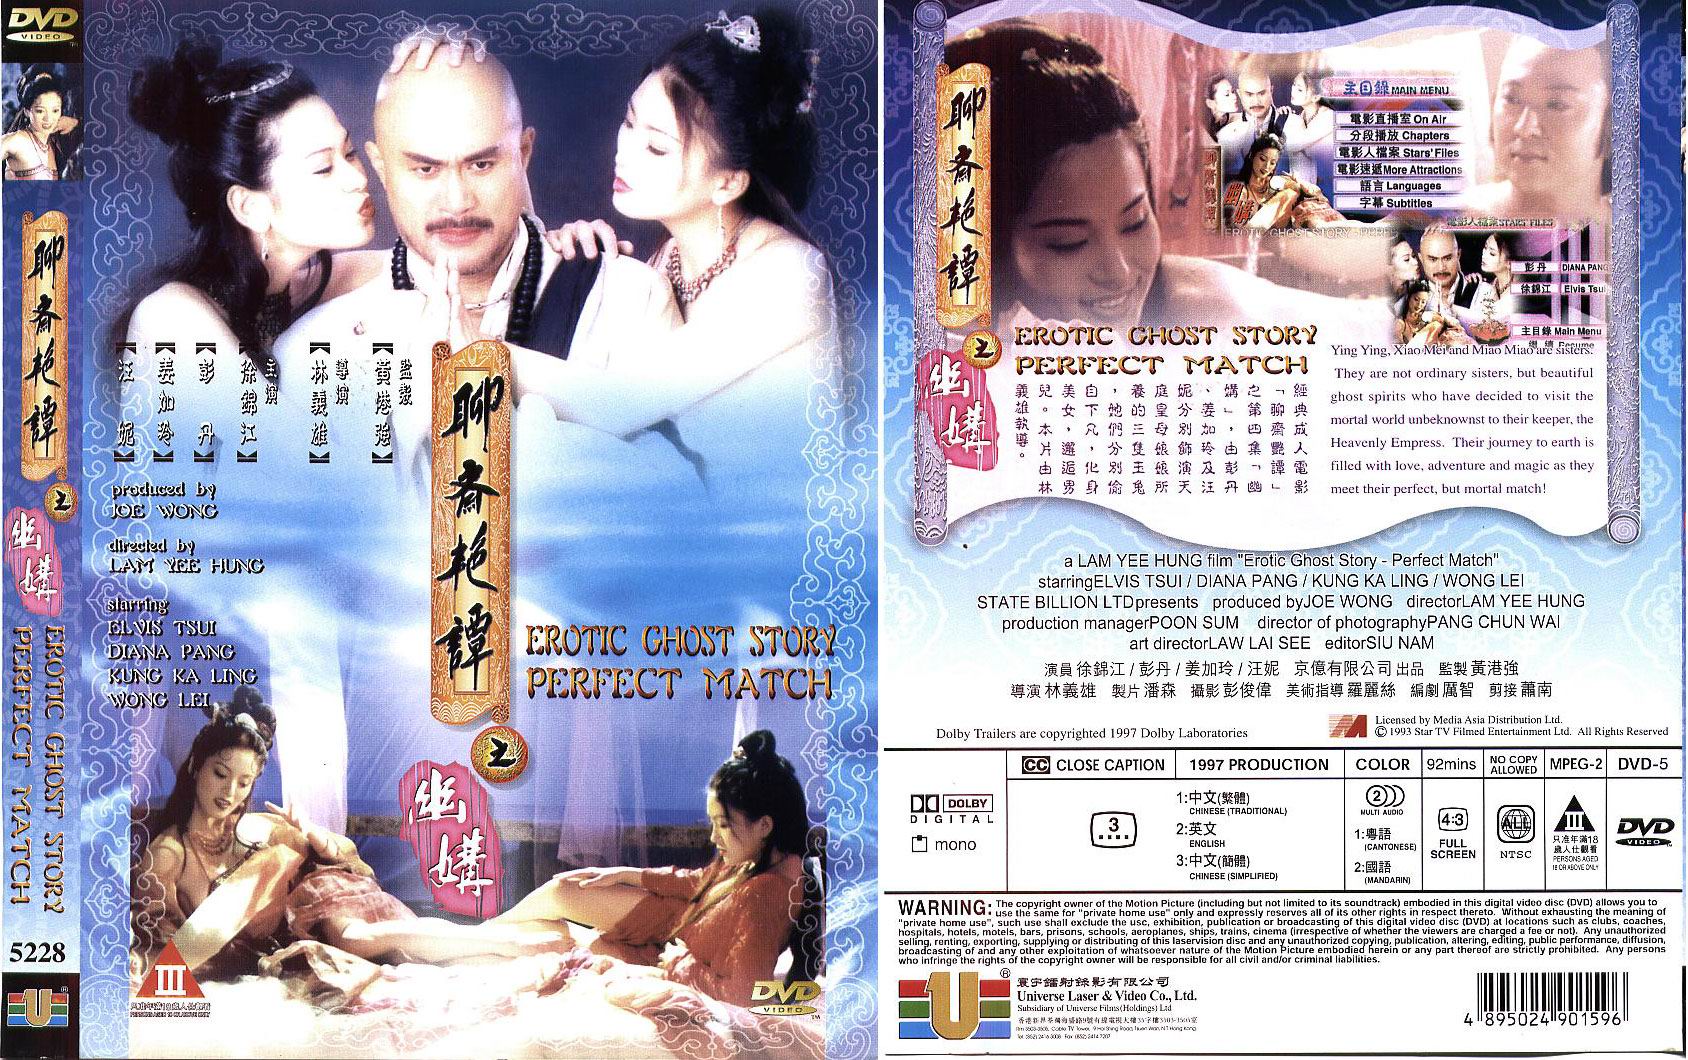 Movie erotic ghost story: perfect match